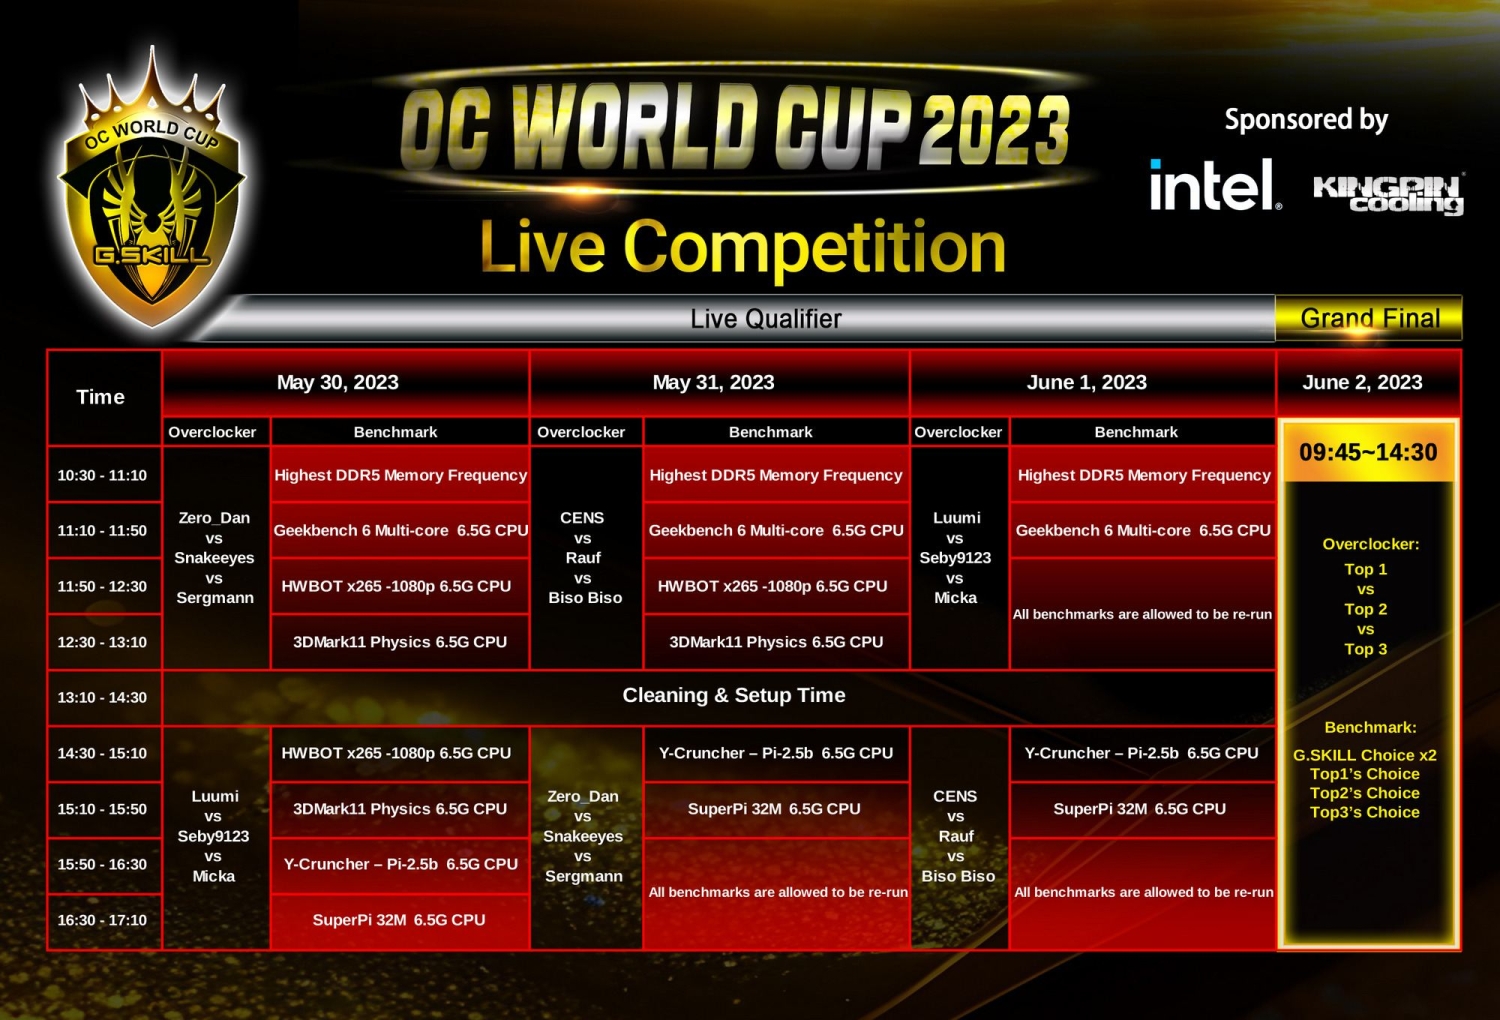 TweakTown Enlarged Image - 7th Annual OC World Cup 2023 Computex 2023 schedule, image credit: G.SKILL.